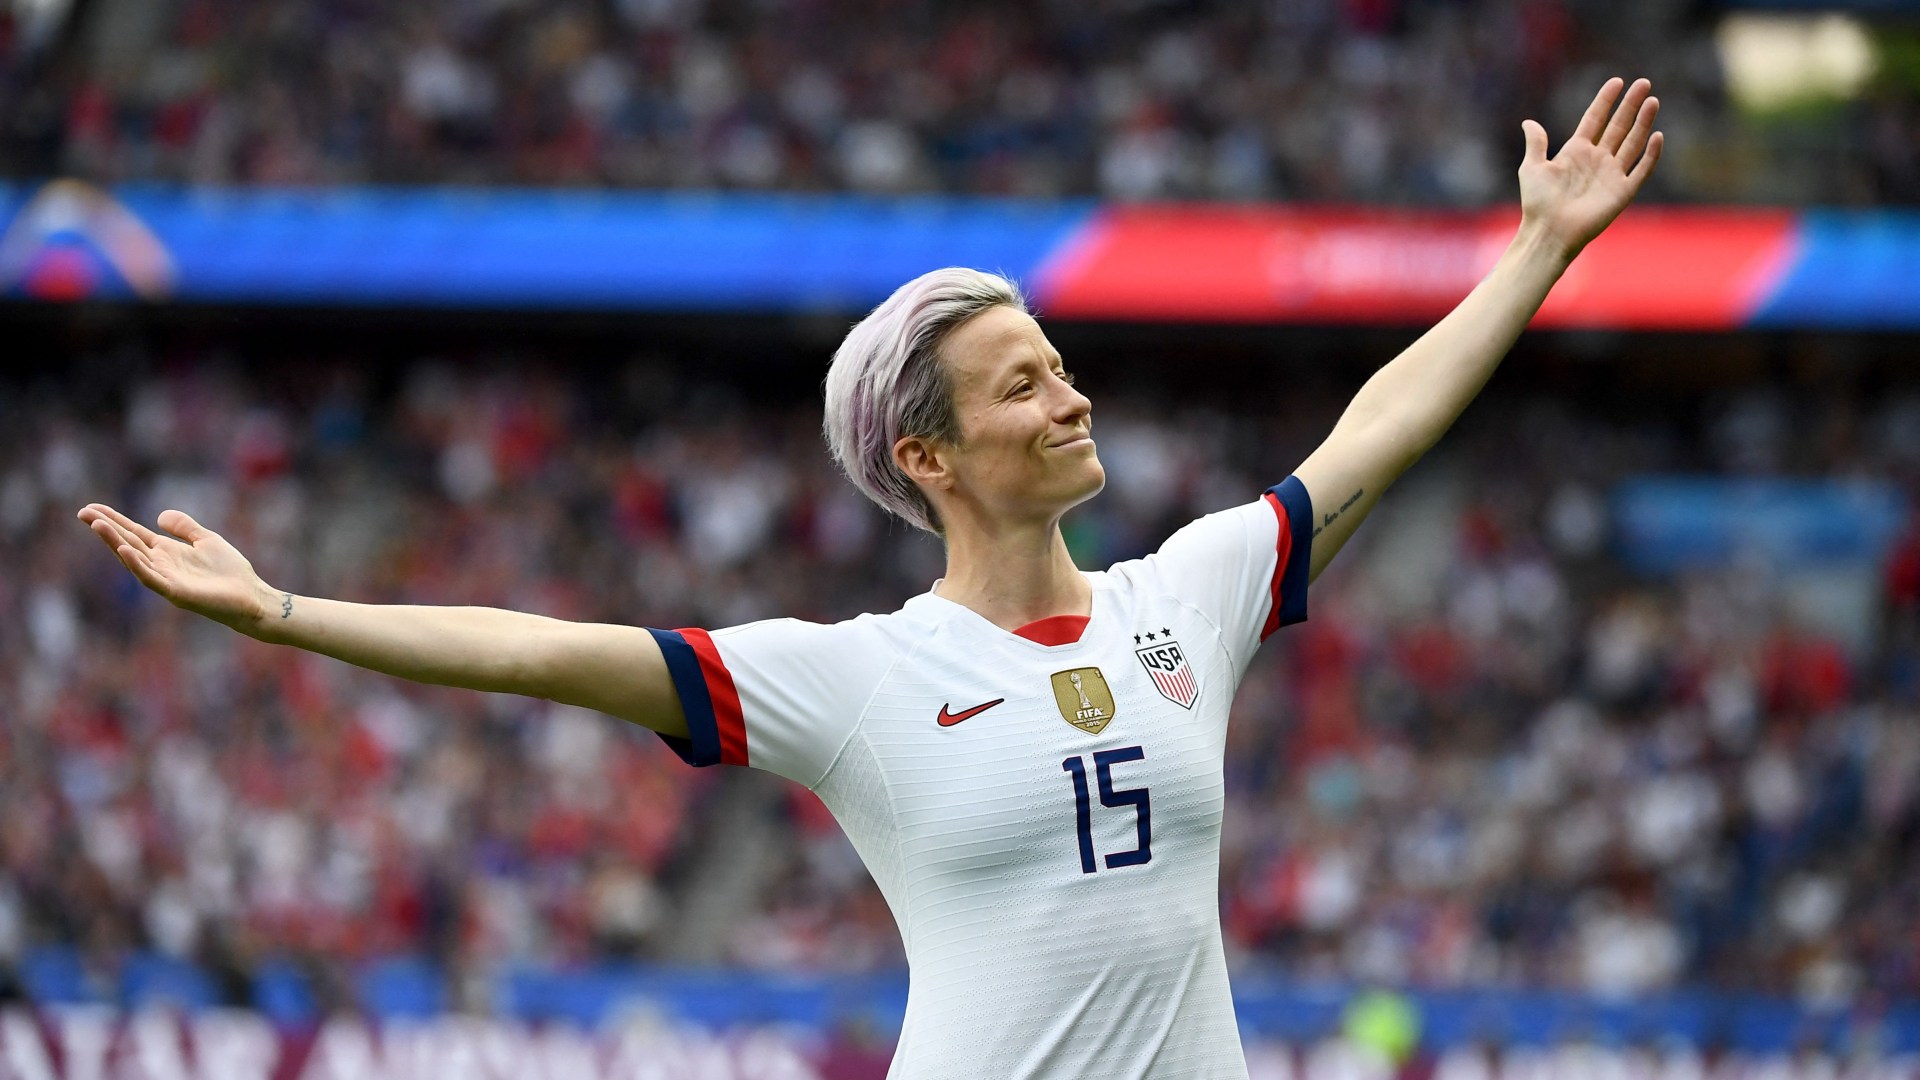 Rapinoe placed alongside Ronaldo and Messi as all-time great ahead of last game